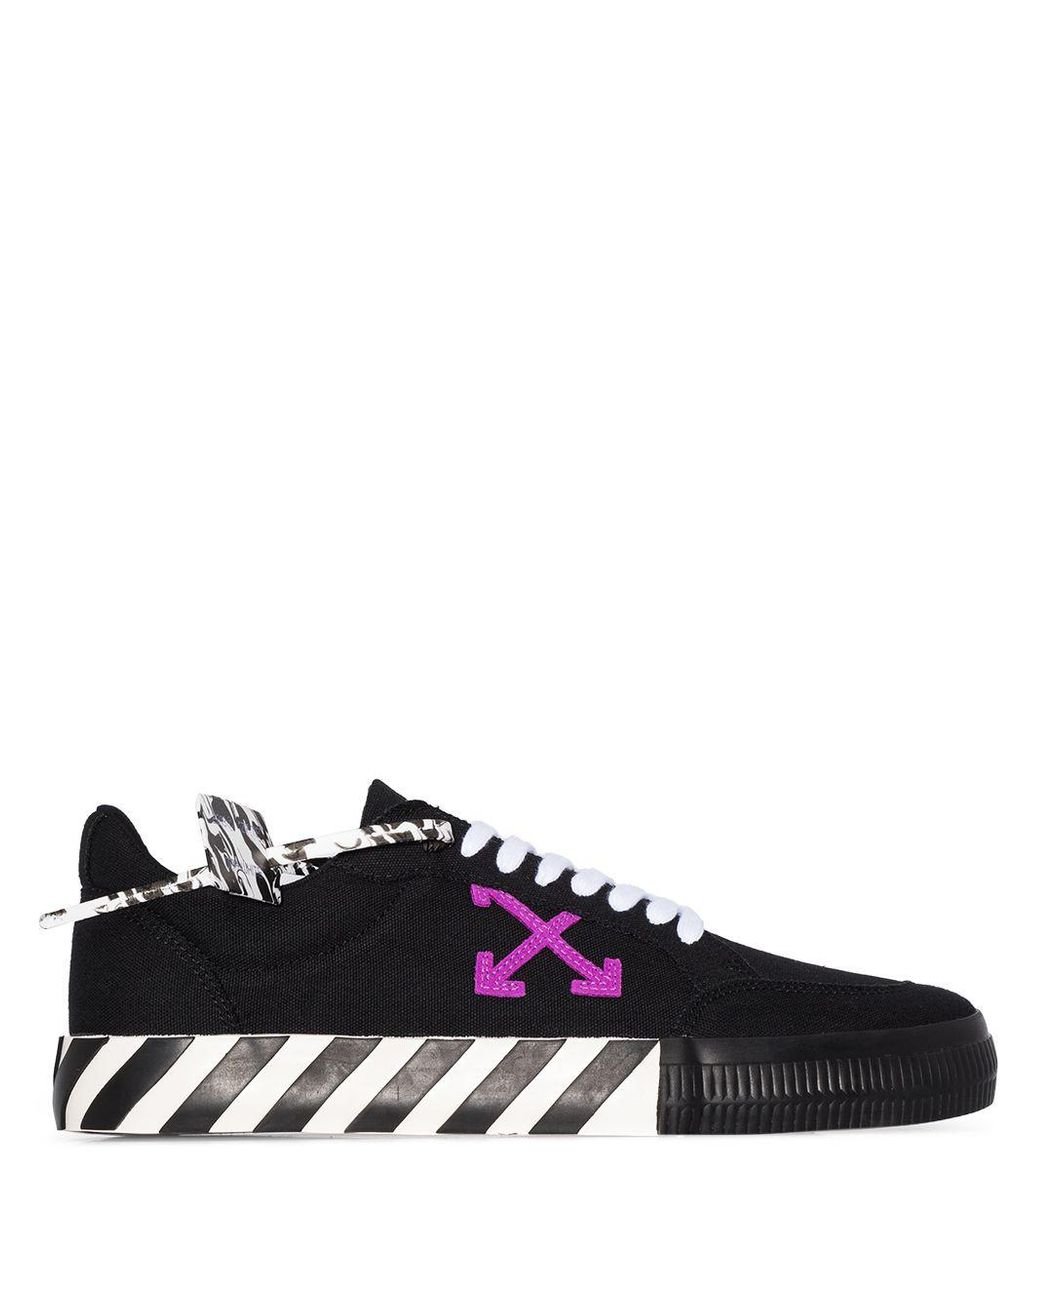 Off-White c/o Virgil Abloh Rubber Vulcanized Low-top Sneakers in Black ...